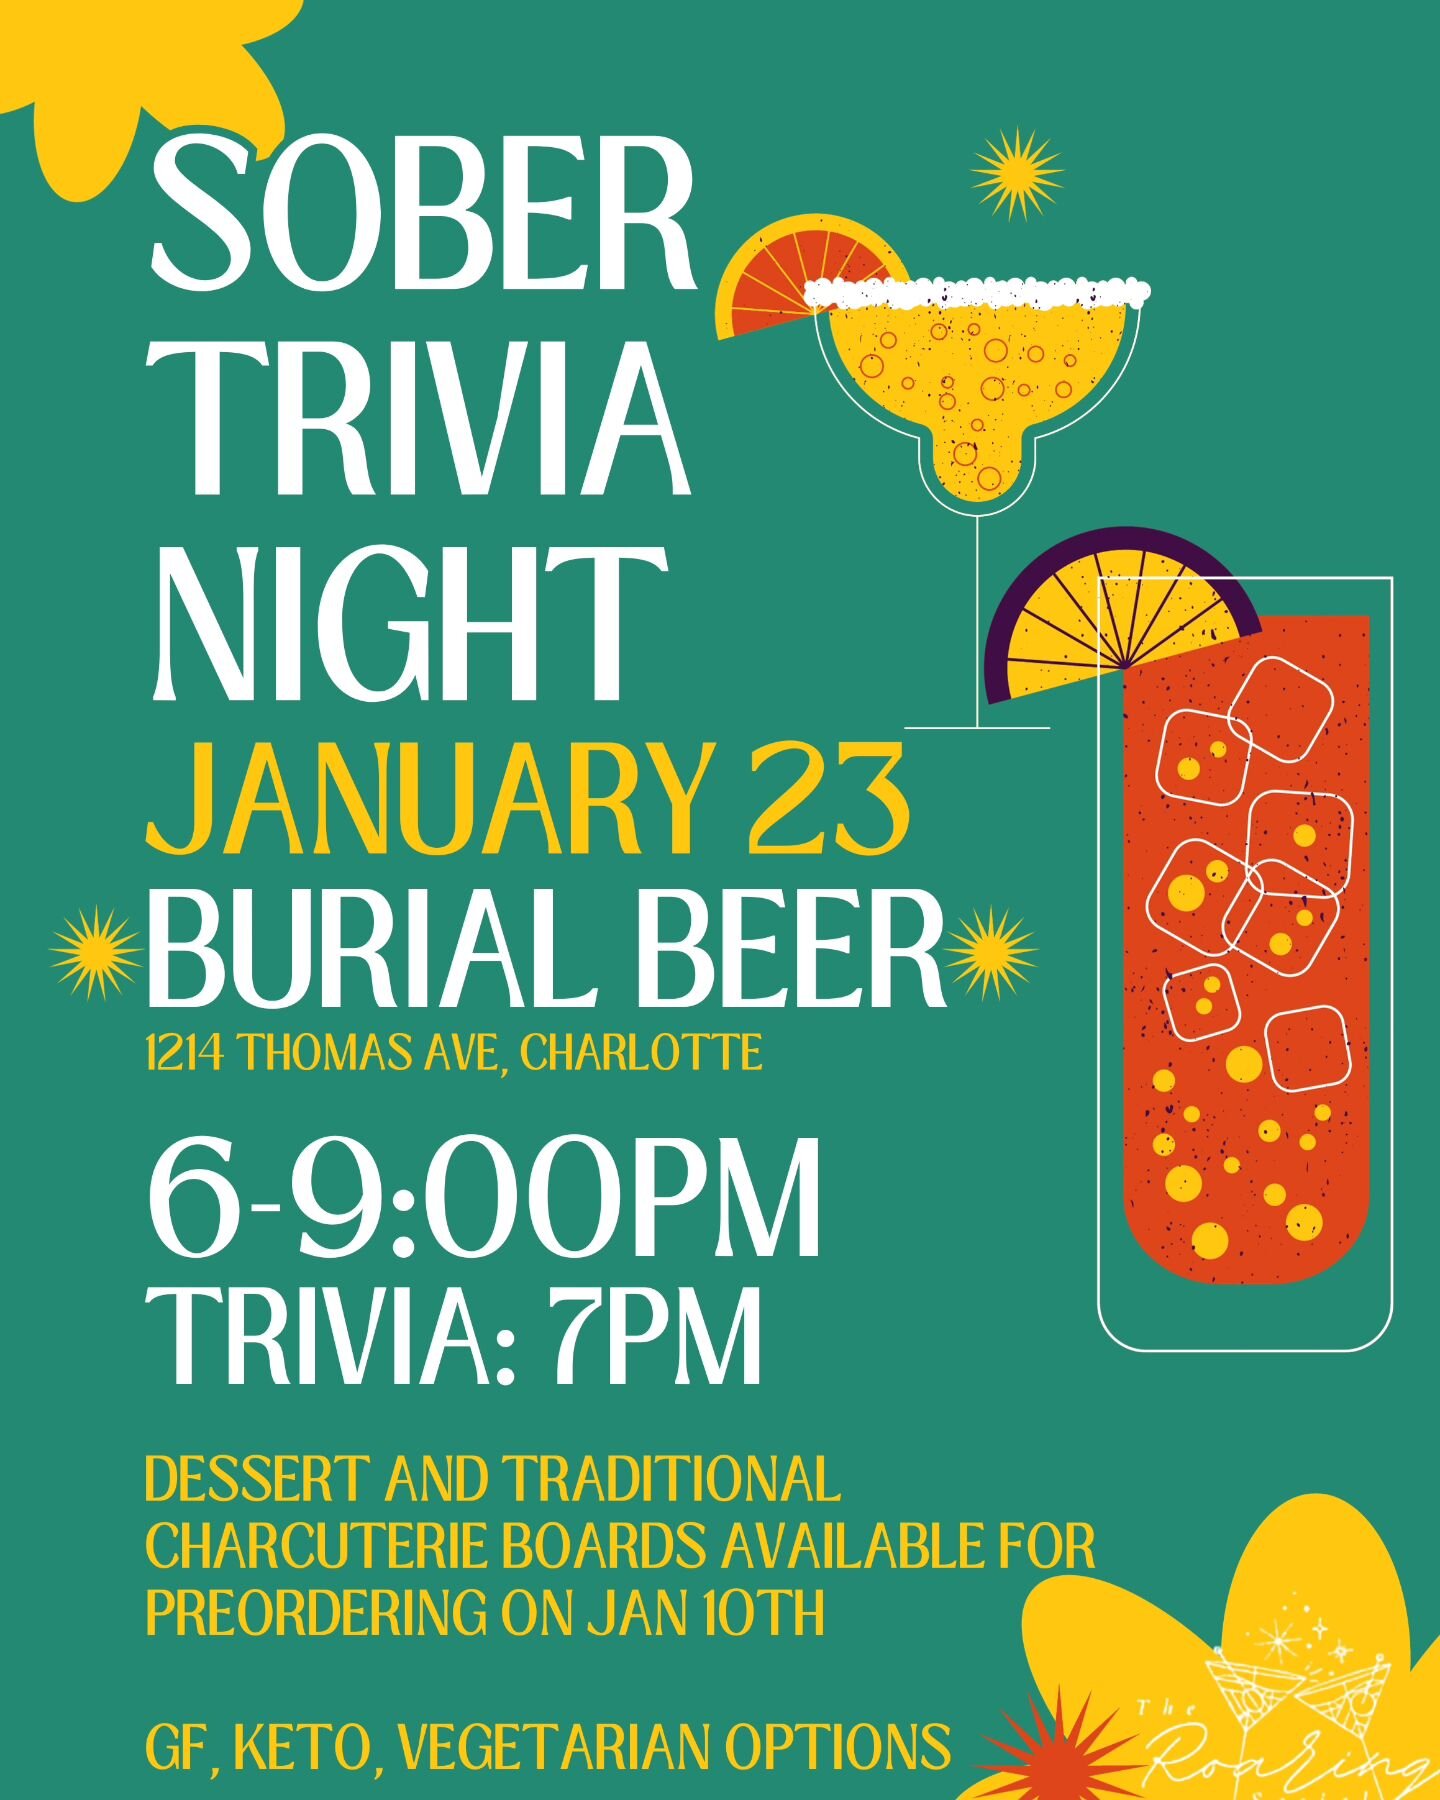 Next up! 
Sober Trivia Night at @burialclt . 
Join us for an unforgettable evening at our Sober Trivia Night with The Roaring Social and Burial Beer! We're thrilled to introduce Burial Beer&rsquo;s brand new Zero Proof Cocktail Menu, showcasing delic